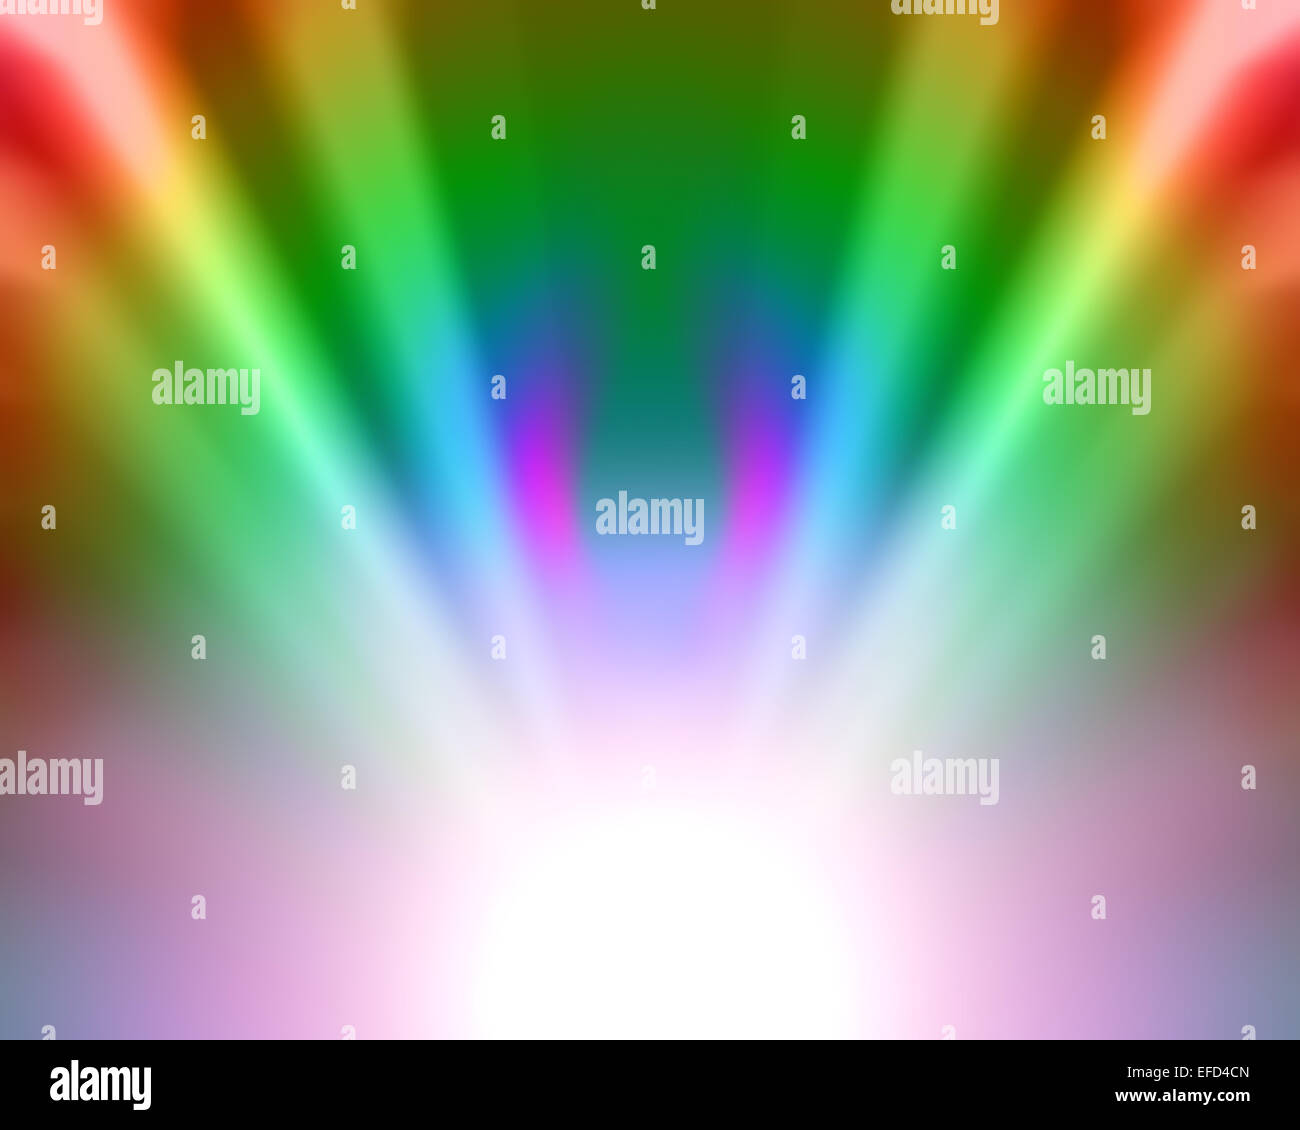 A 'fun' image of multicolored light emerging from a white center. Use as background for disco, party or ceremony articles Stock Photo